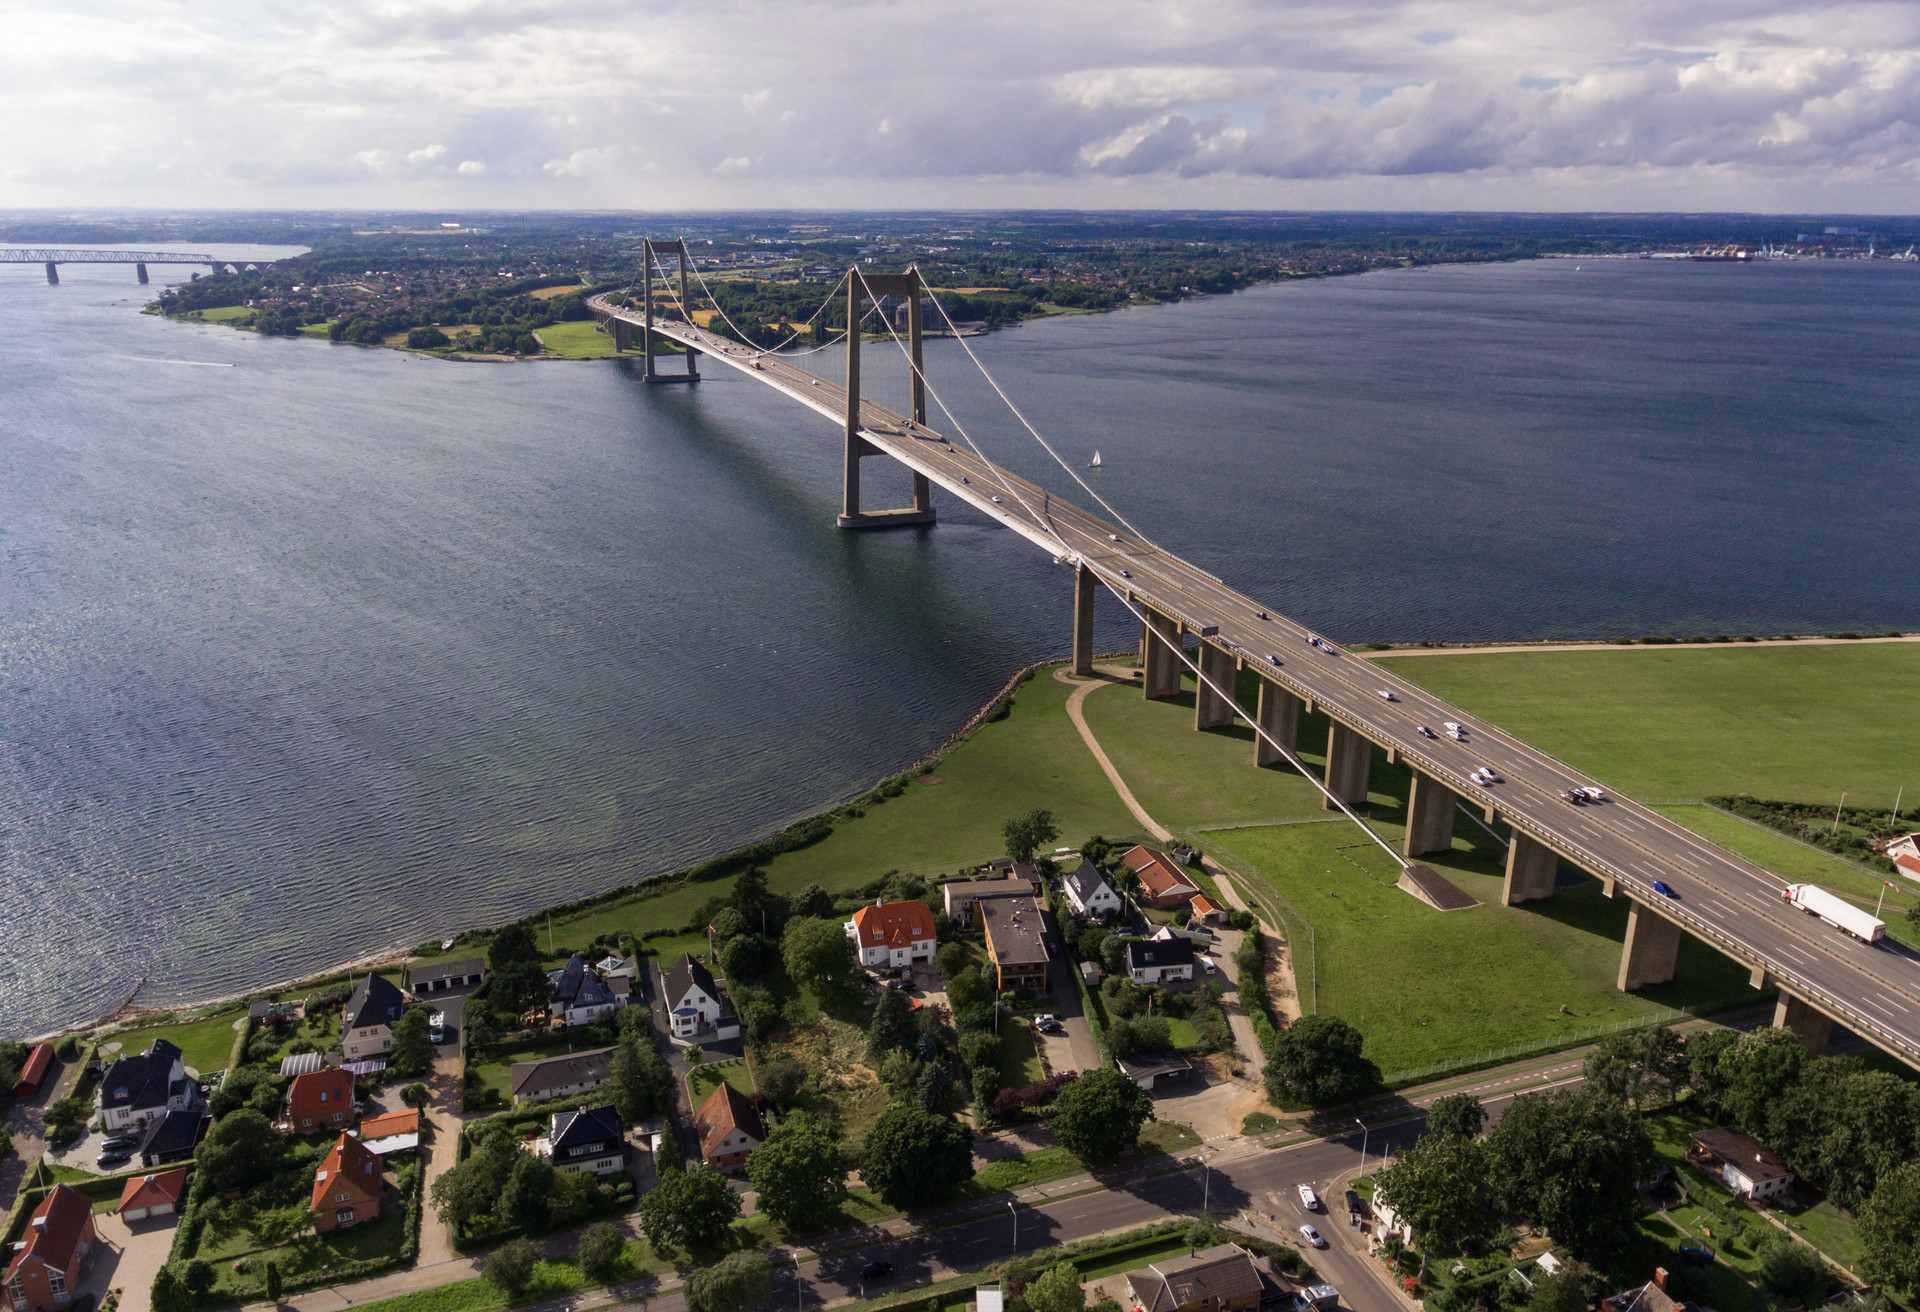 New Little Belt Bridge and small town of Middelfart seen from aerial view